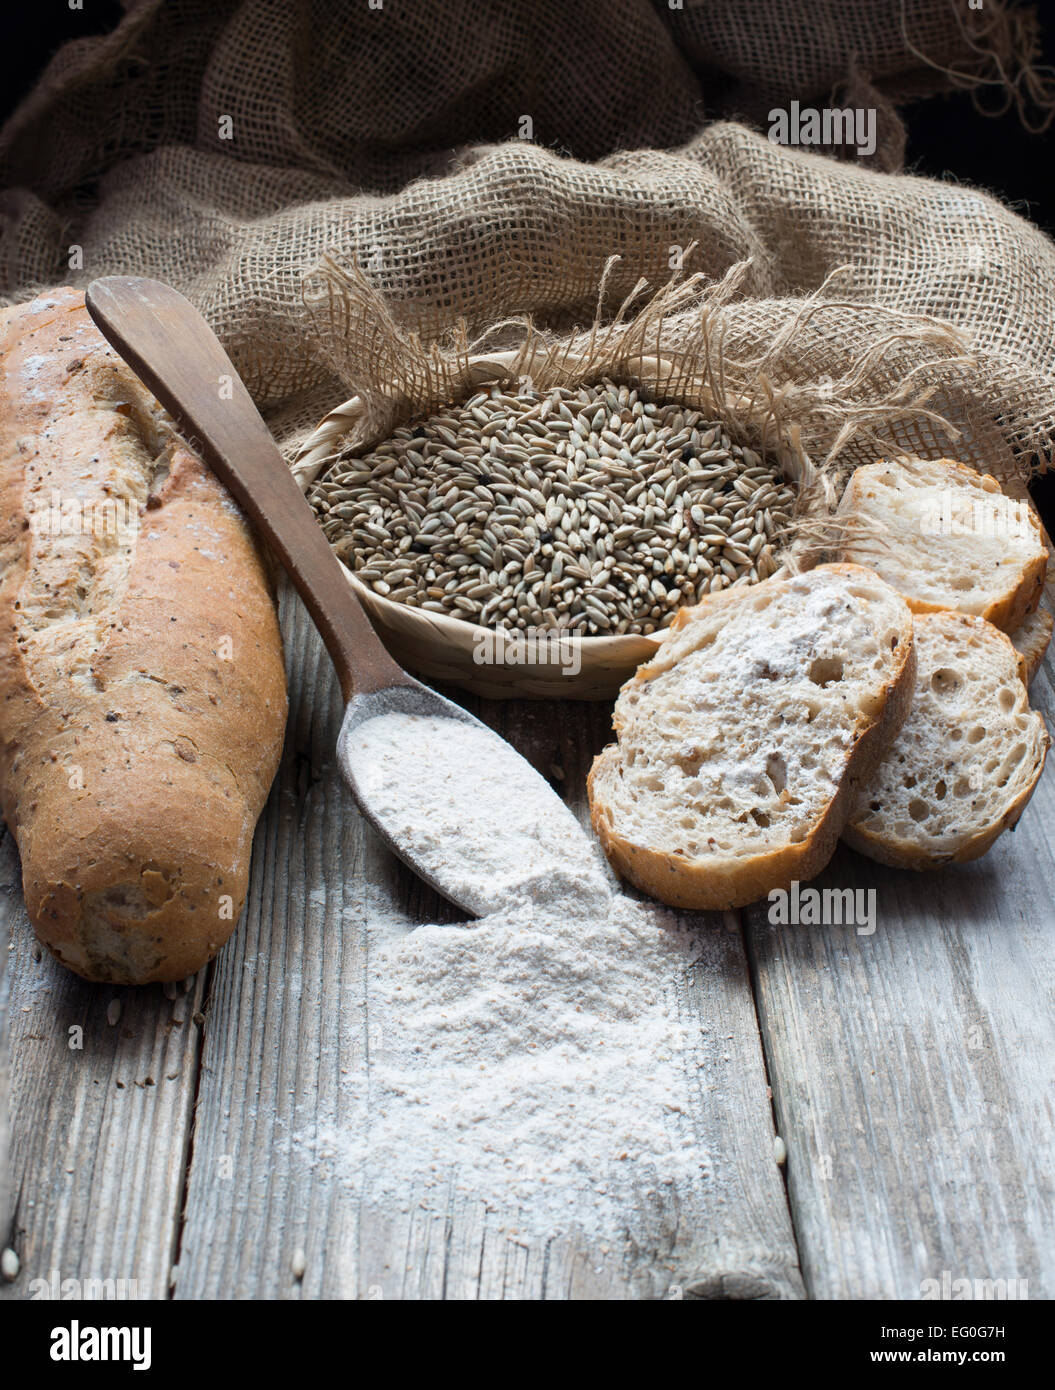 Slices of bread with rye seeds and flour Stock Photo